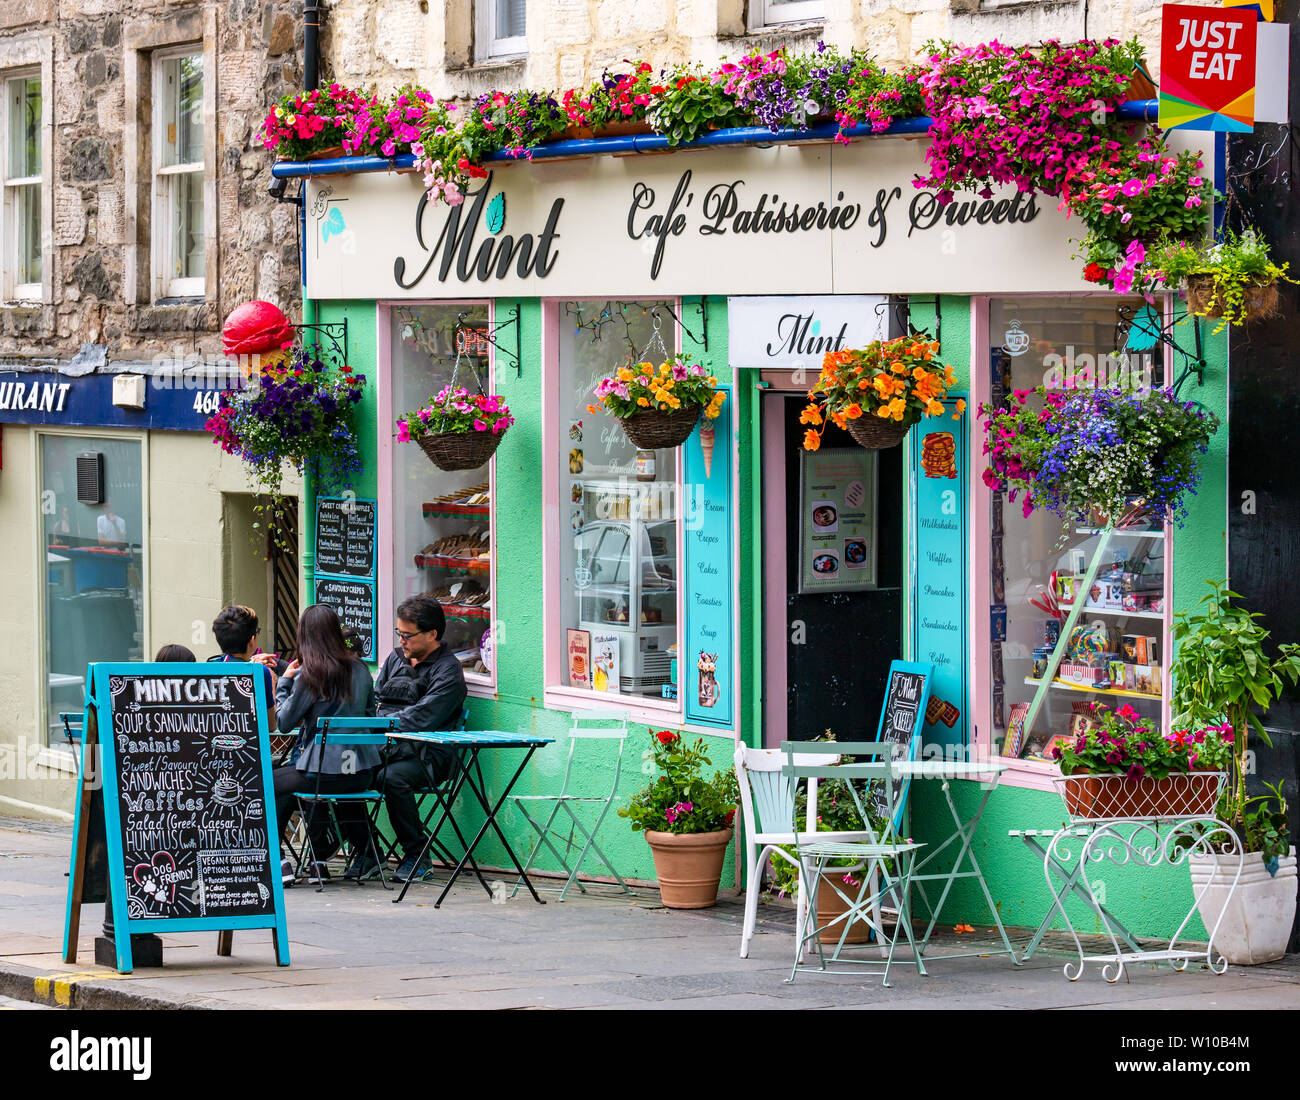 People sitting at pavement table, Mint Cafe & Patisserie, Baker Street, Stirling, Scotland, UK Stock Photo